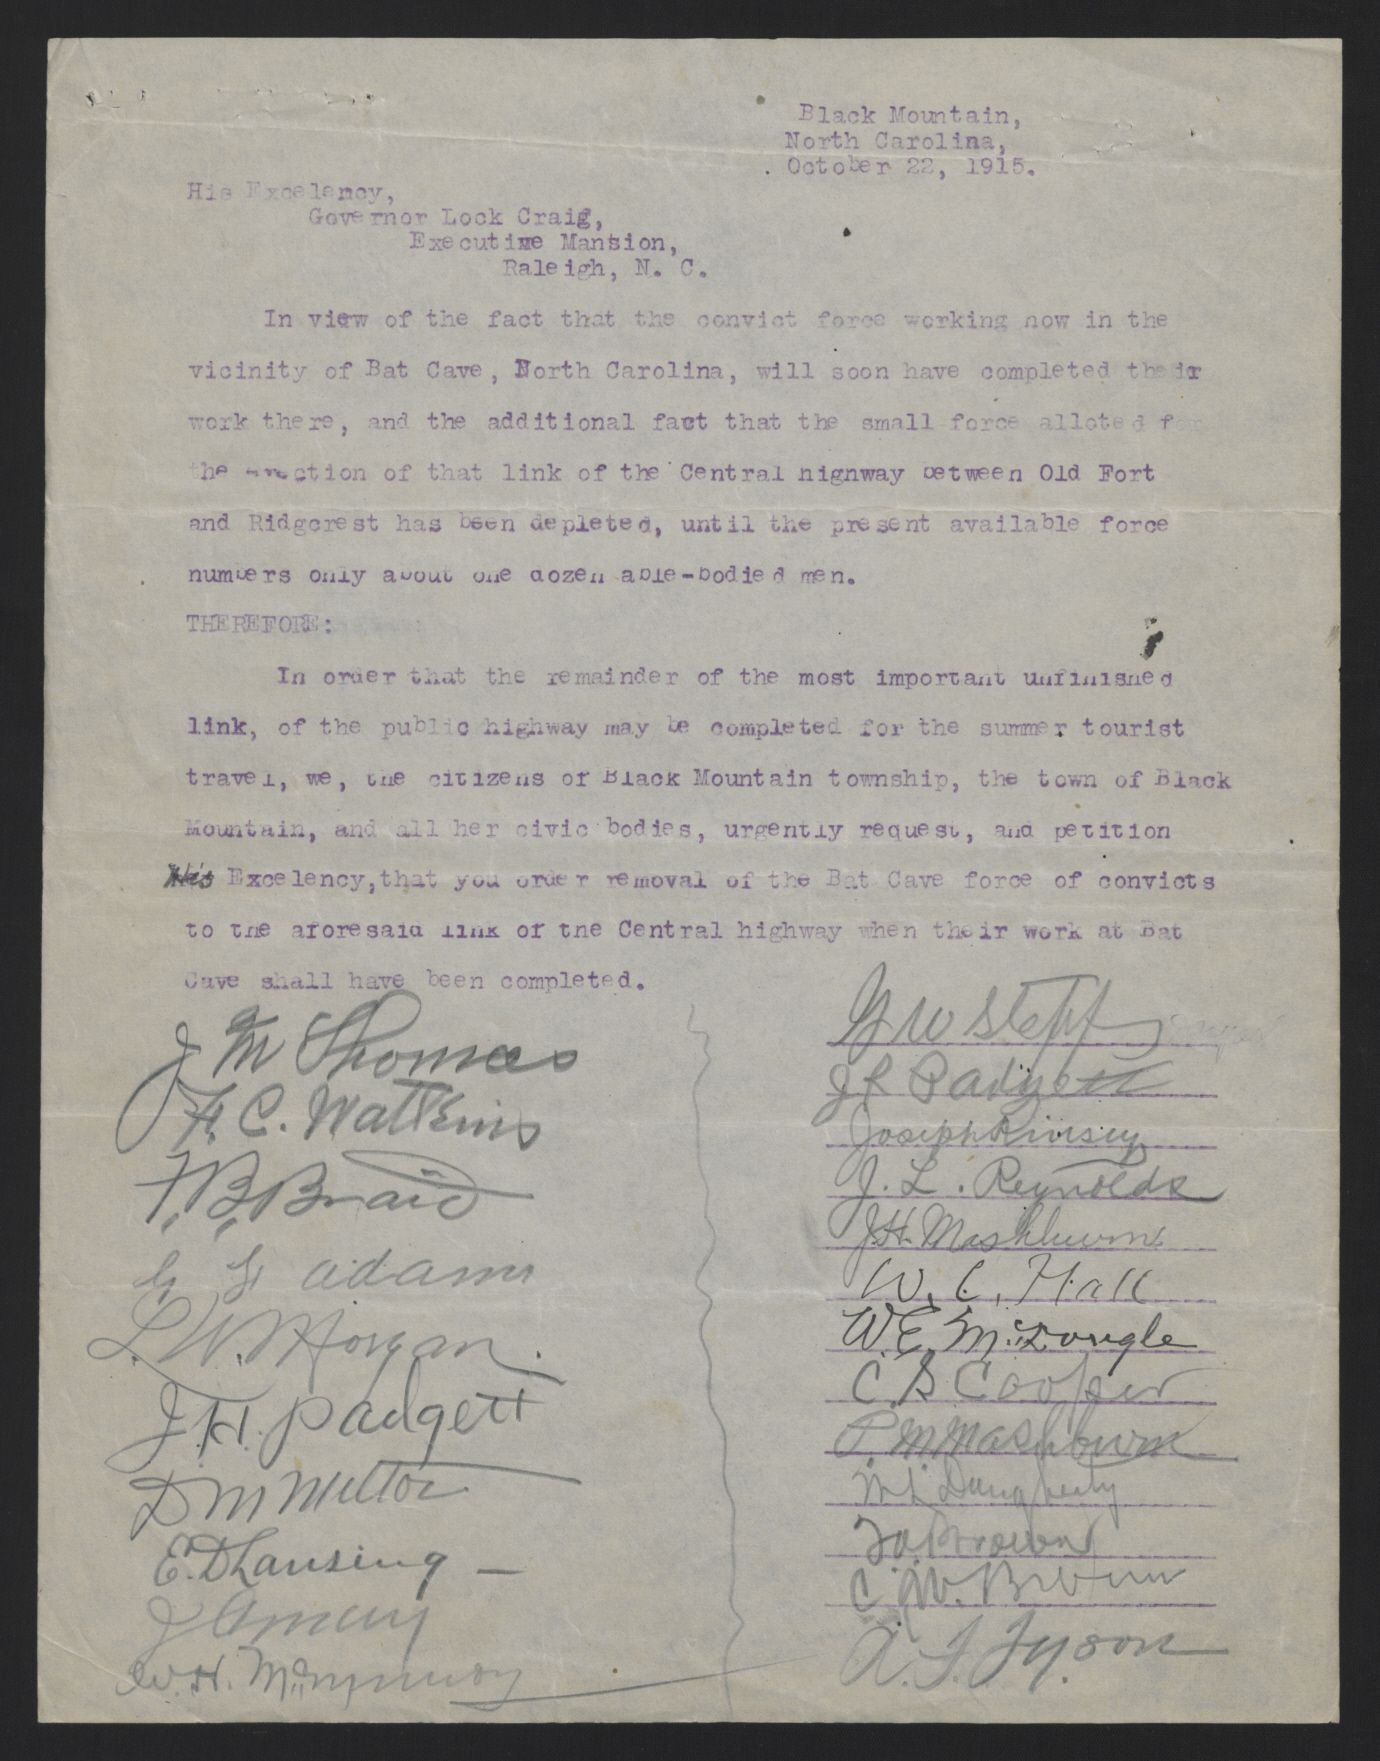 Petition from the Citizens of Black Mountain Township to Locke Craig, October 22, 1915, page 1